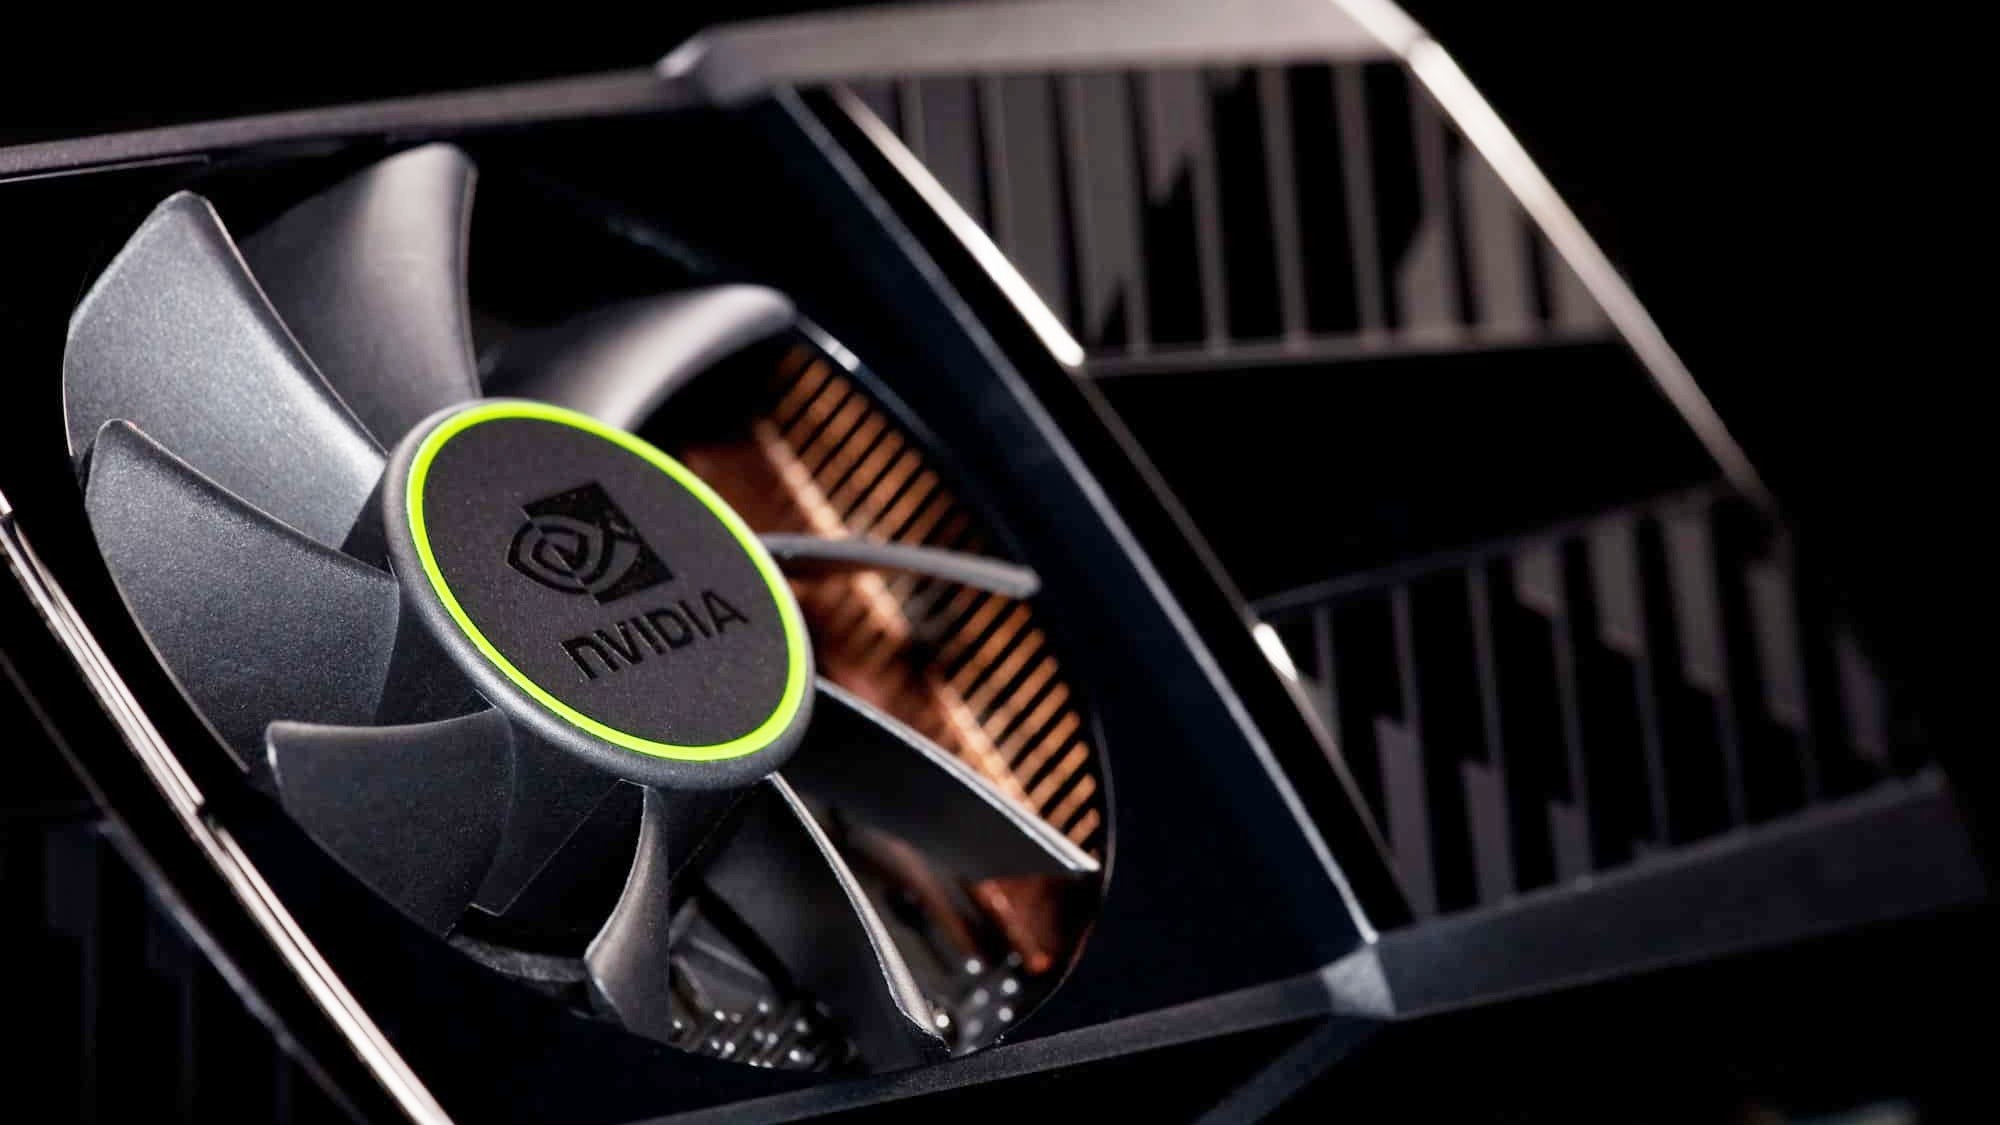 Image for Nvidia blames "challenging market conditions" for Q3 forecast misses